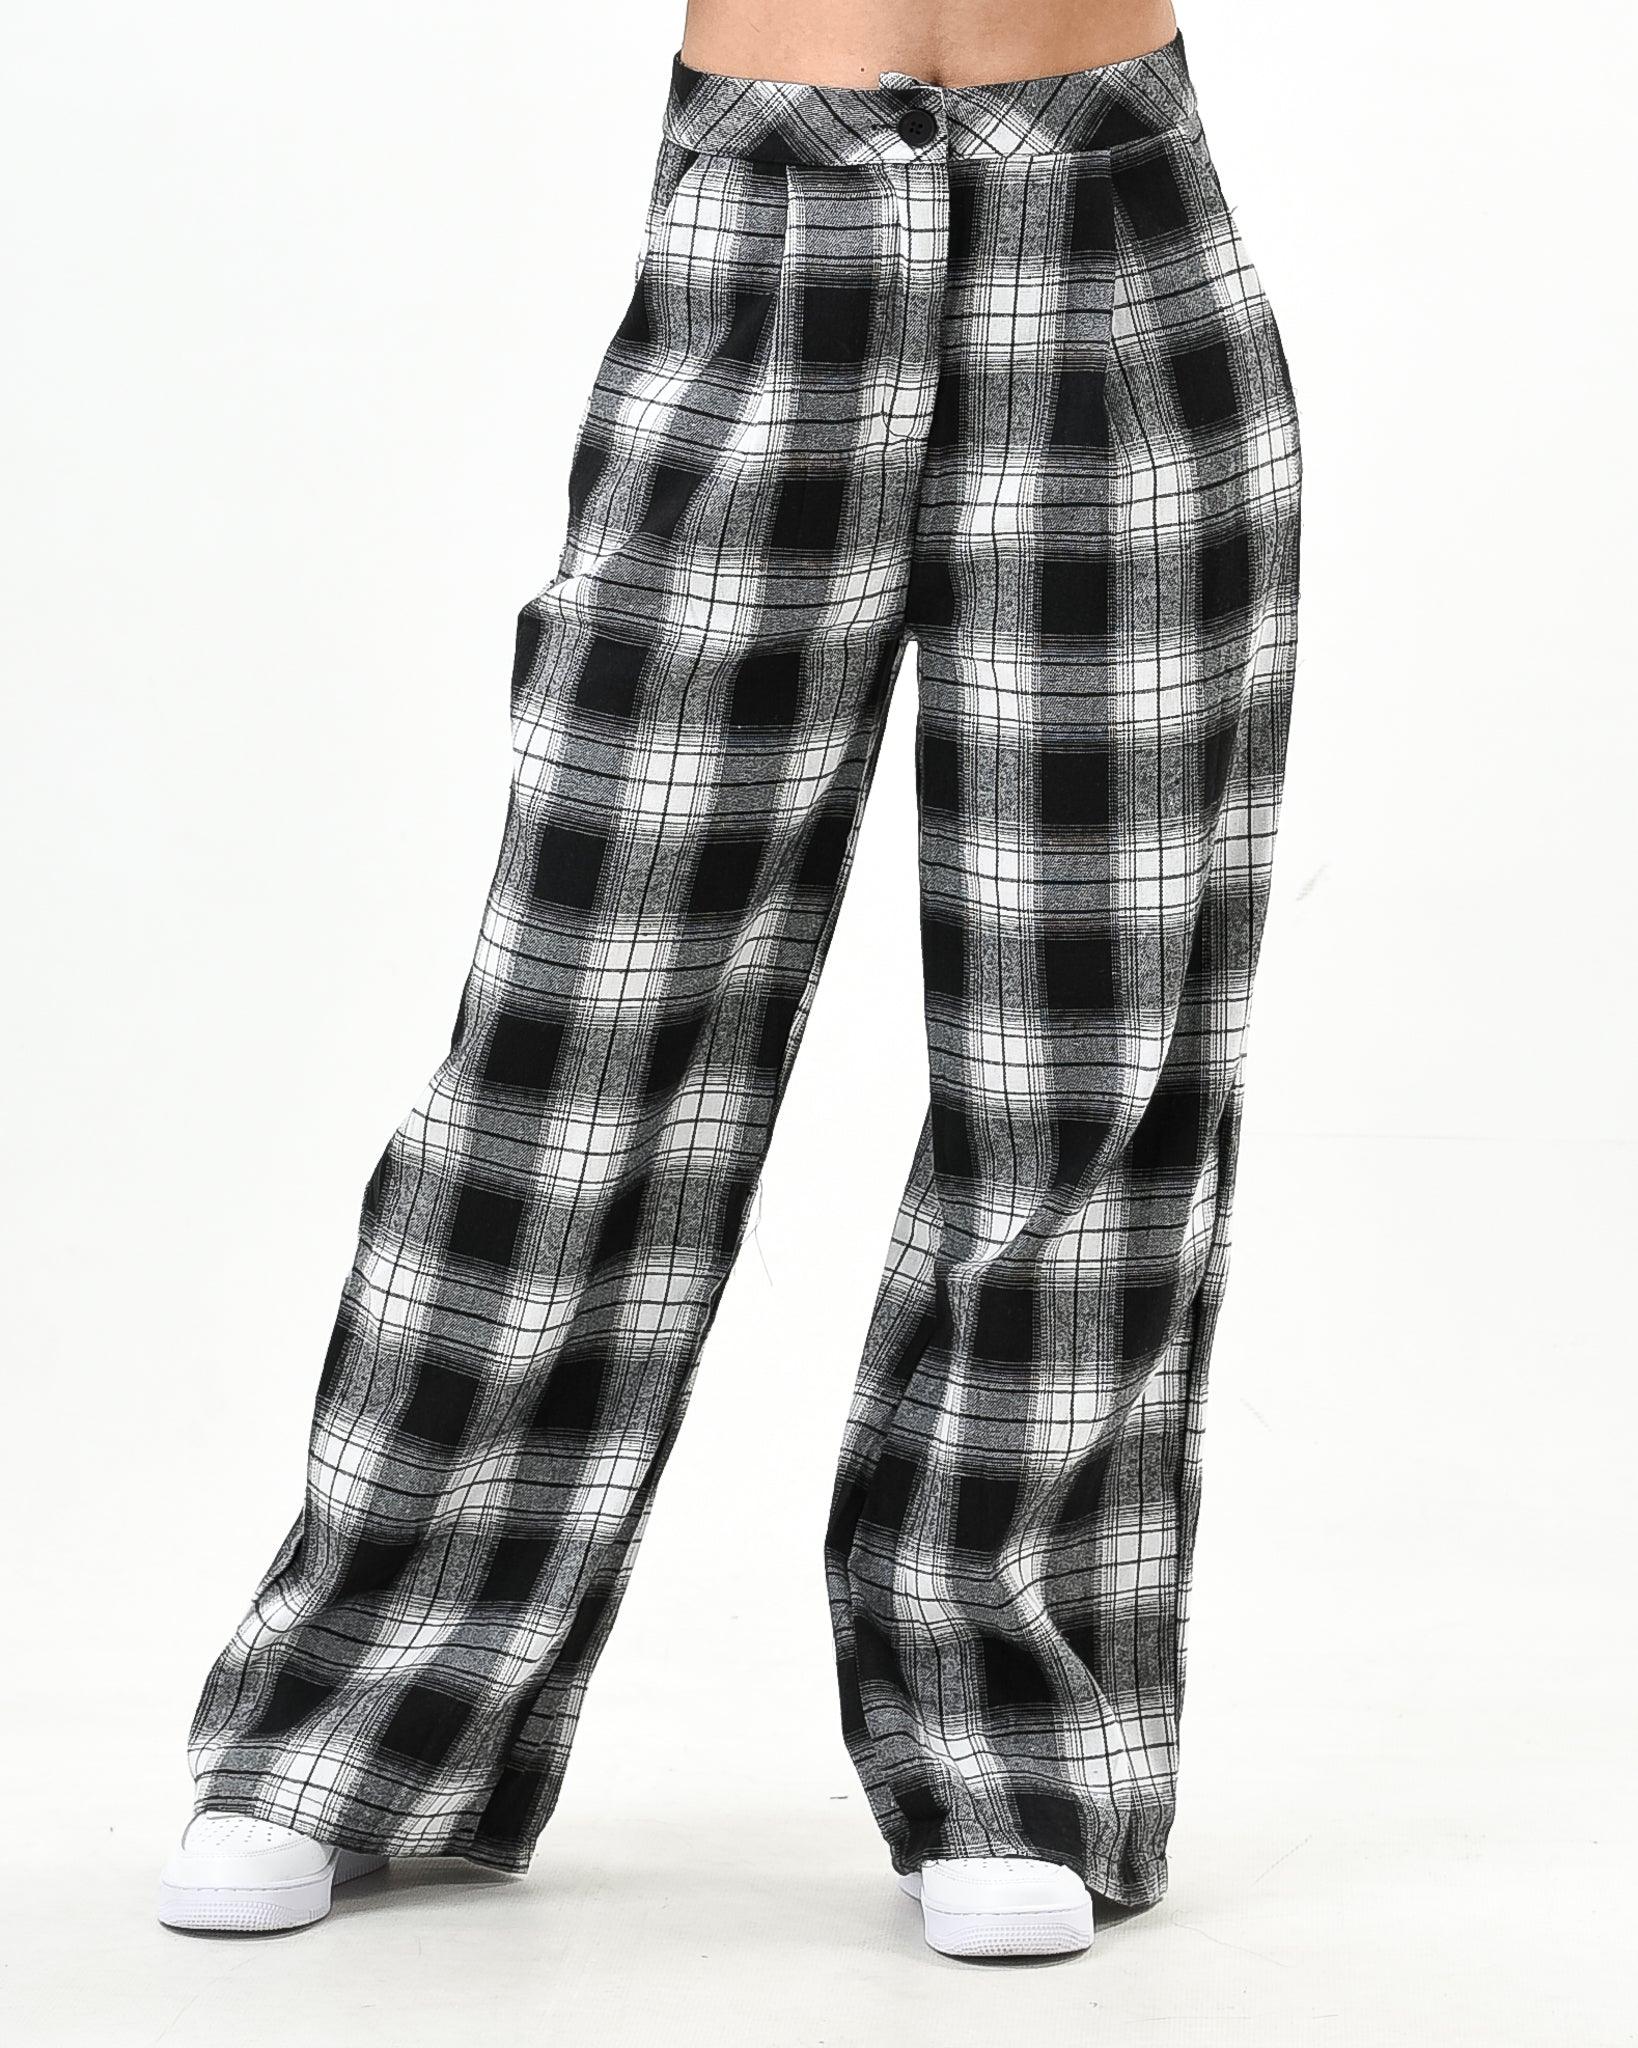 Baggy plaid pants with pockets